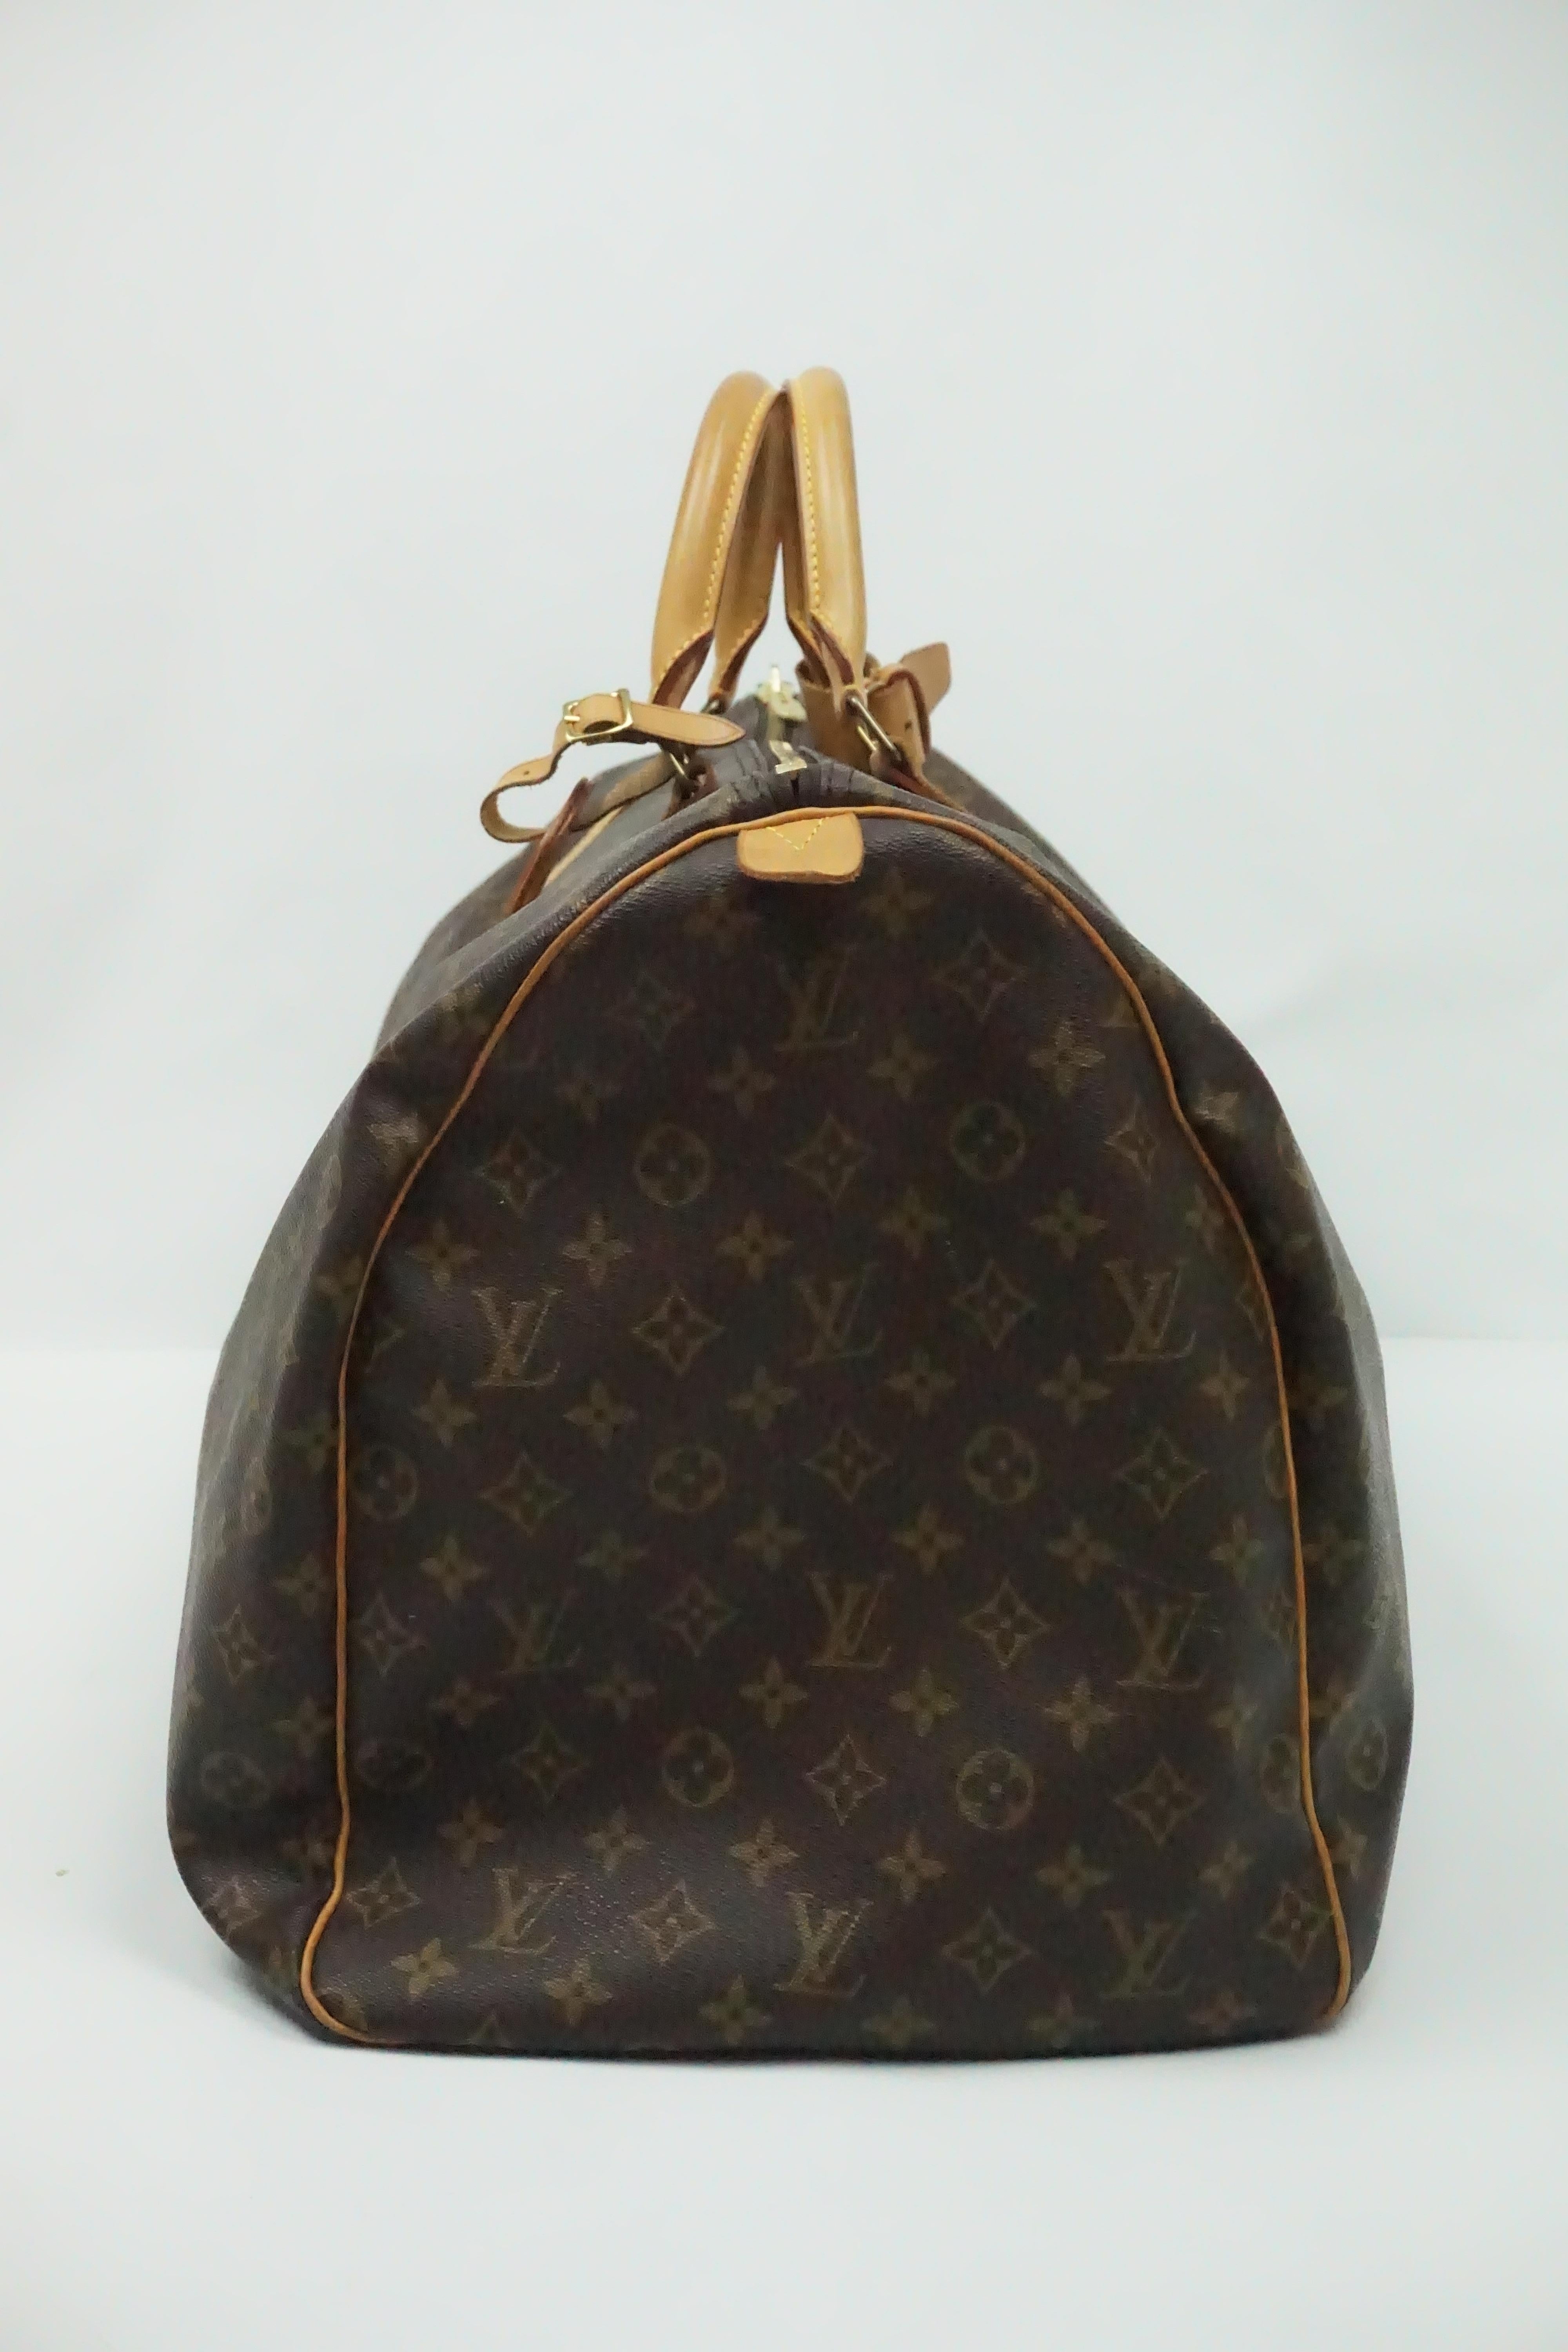 Louis Vuitton Monogram Keepall Duffel Luggage   This beautiful duffel bag is in good condition. This bag has been used before, however, it still looks like there is little to no wear on it. The duffel has two handles with a luggage tag attached. The